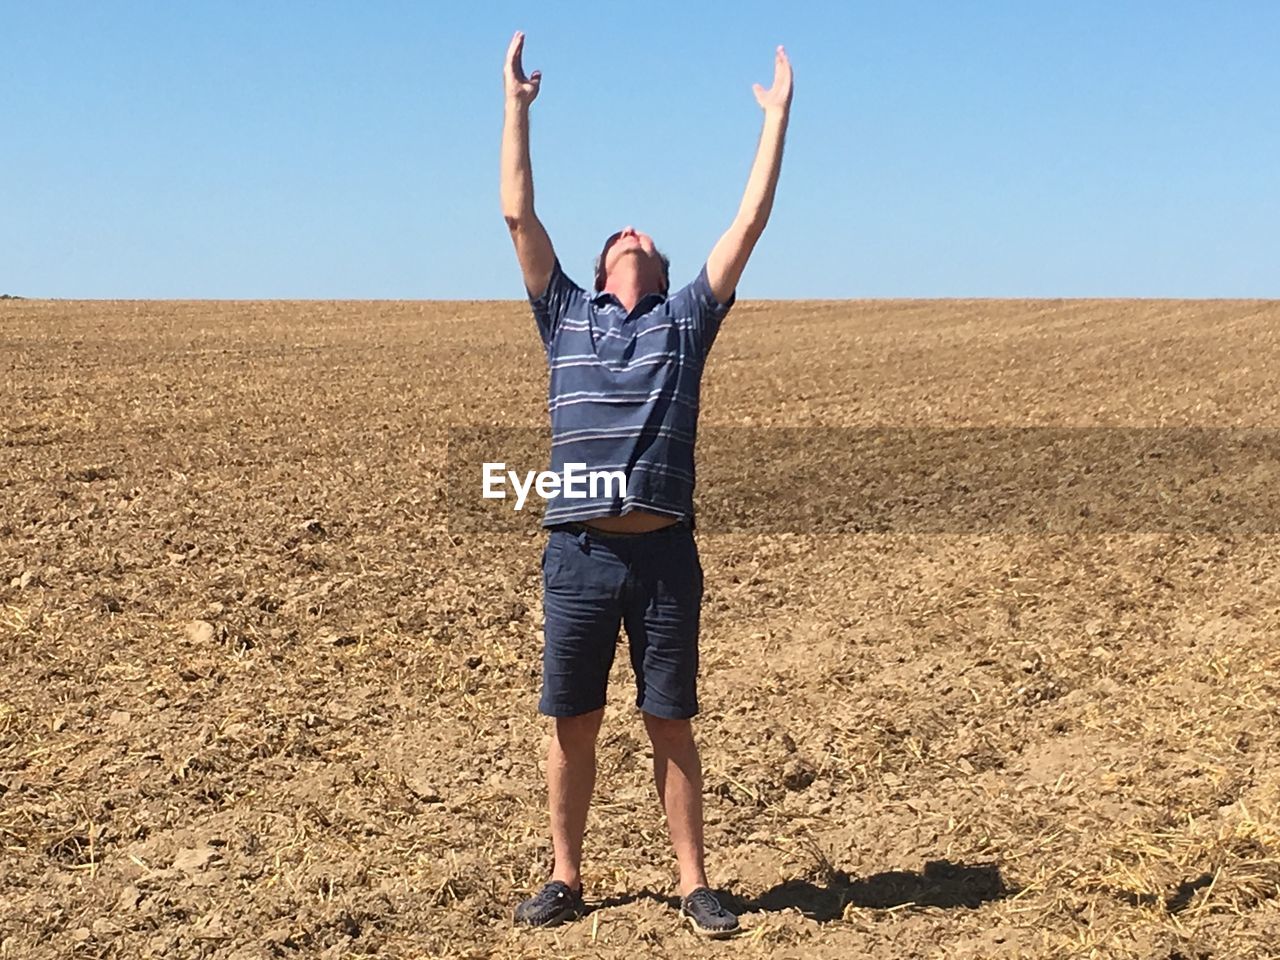 Full length of man with arms raised standing on field